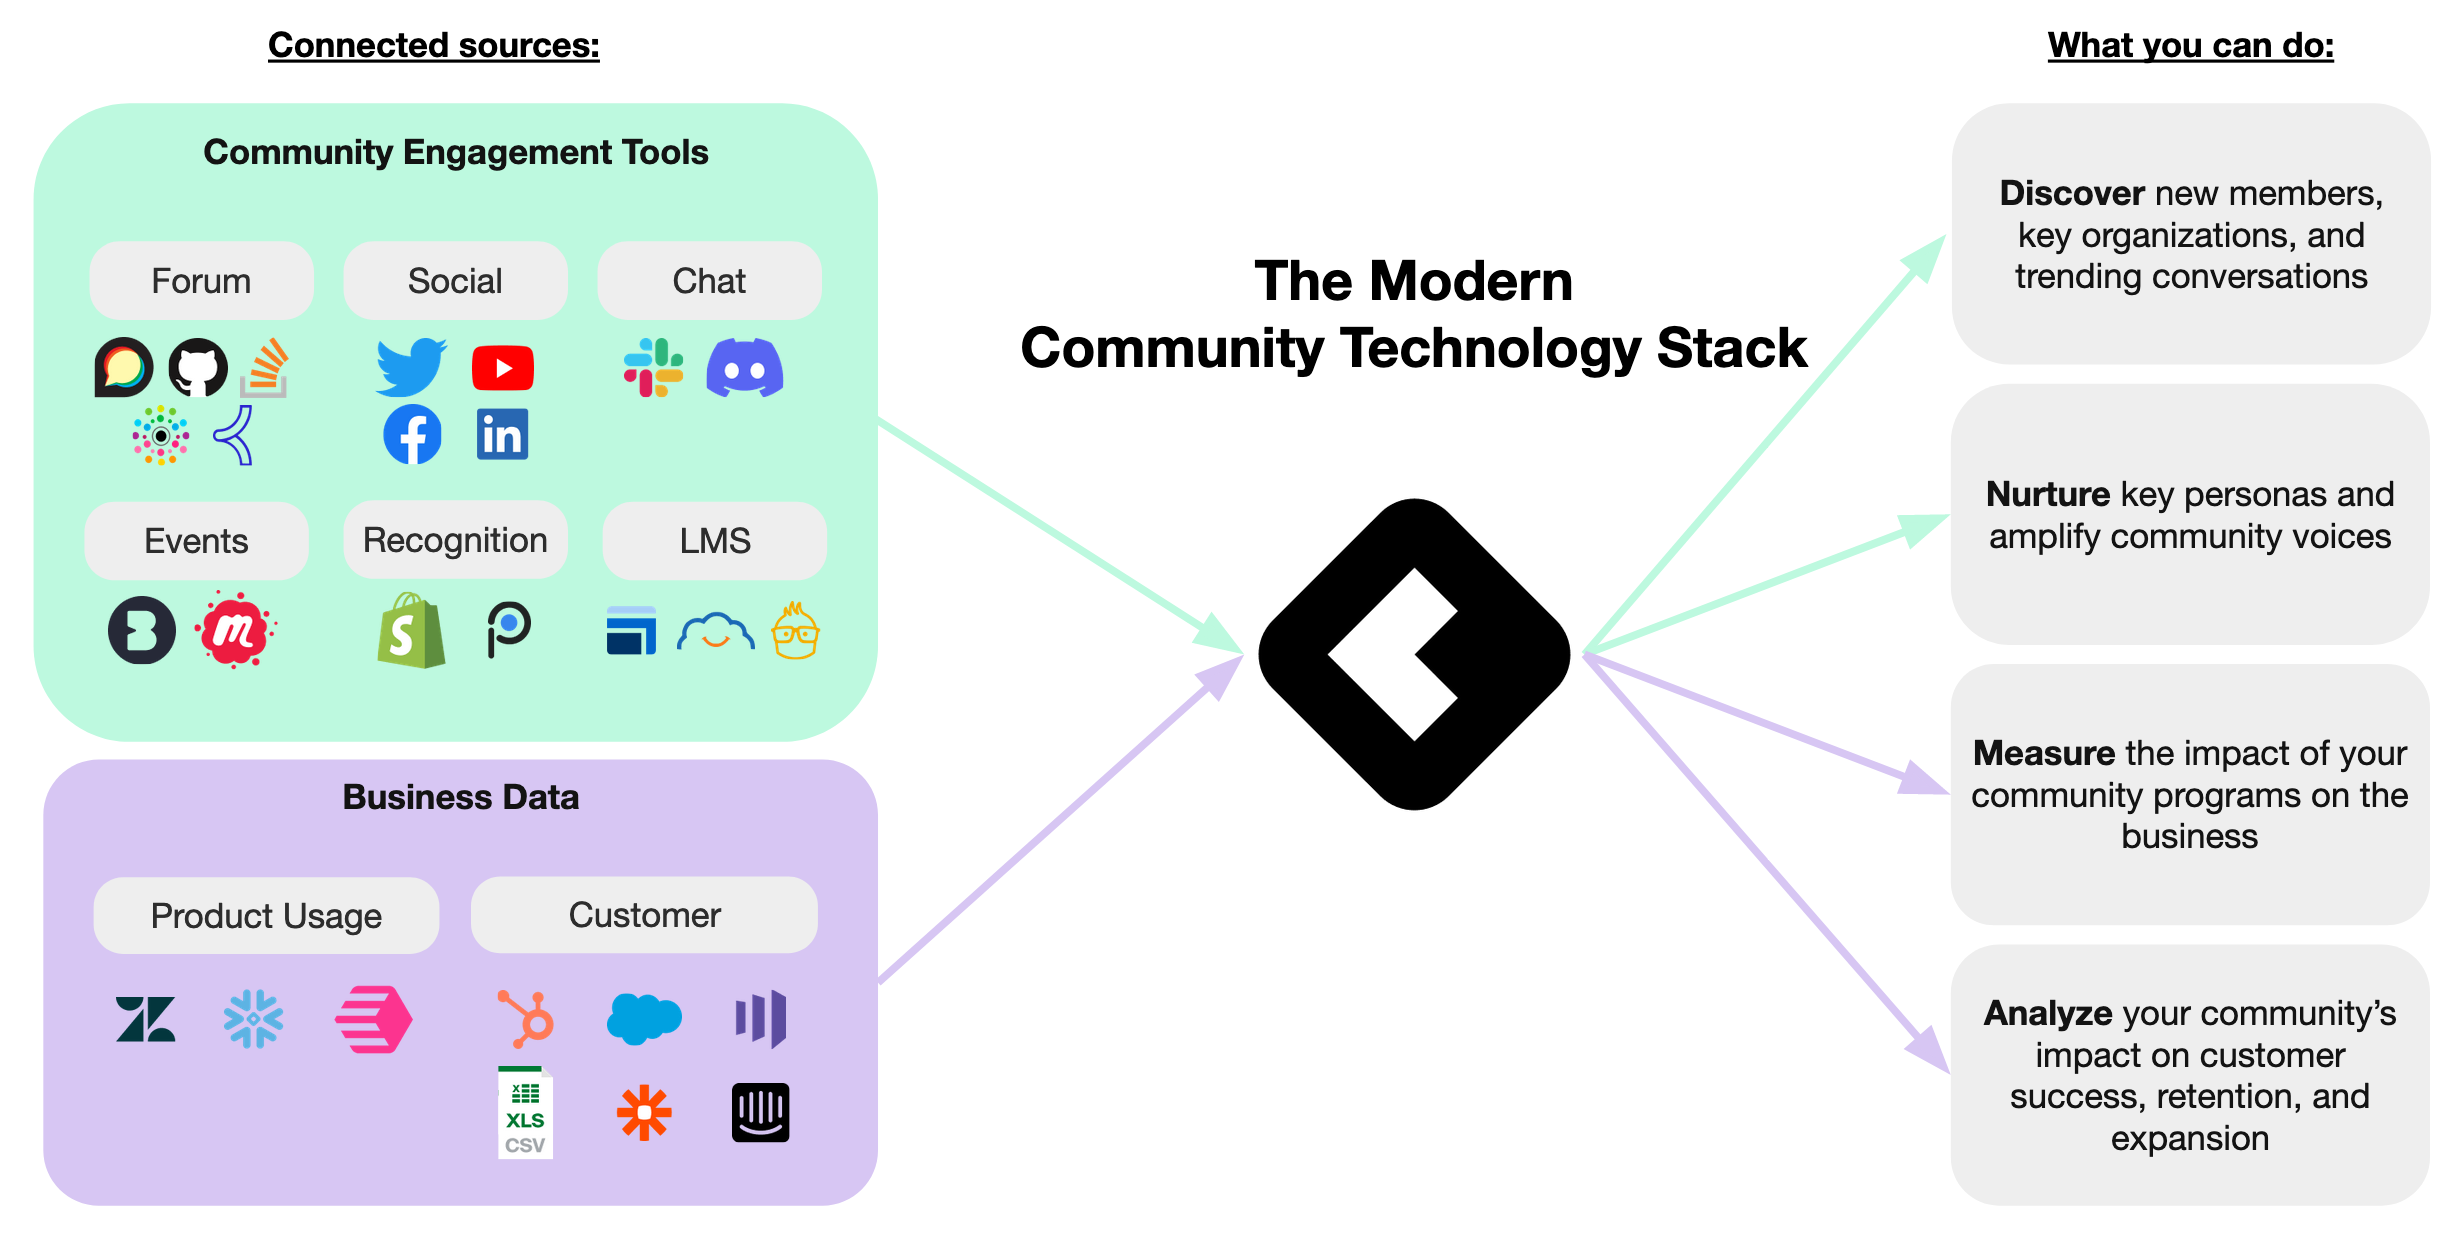 Common Room is a community intelligence platform that brings together community engagement, product usage, and customer data into a single place